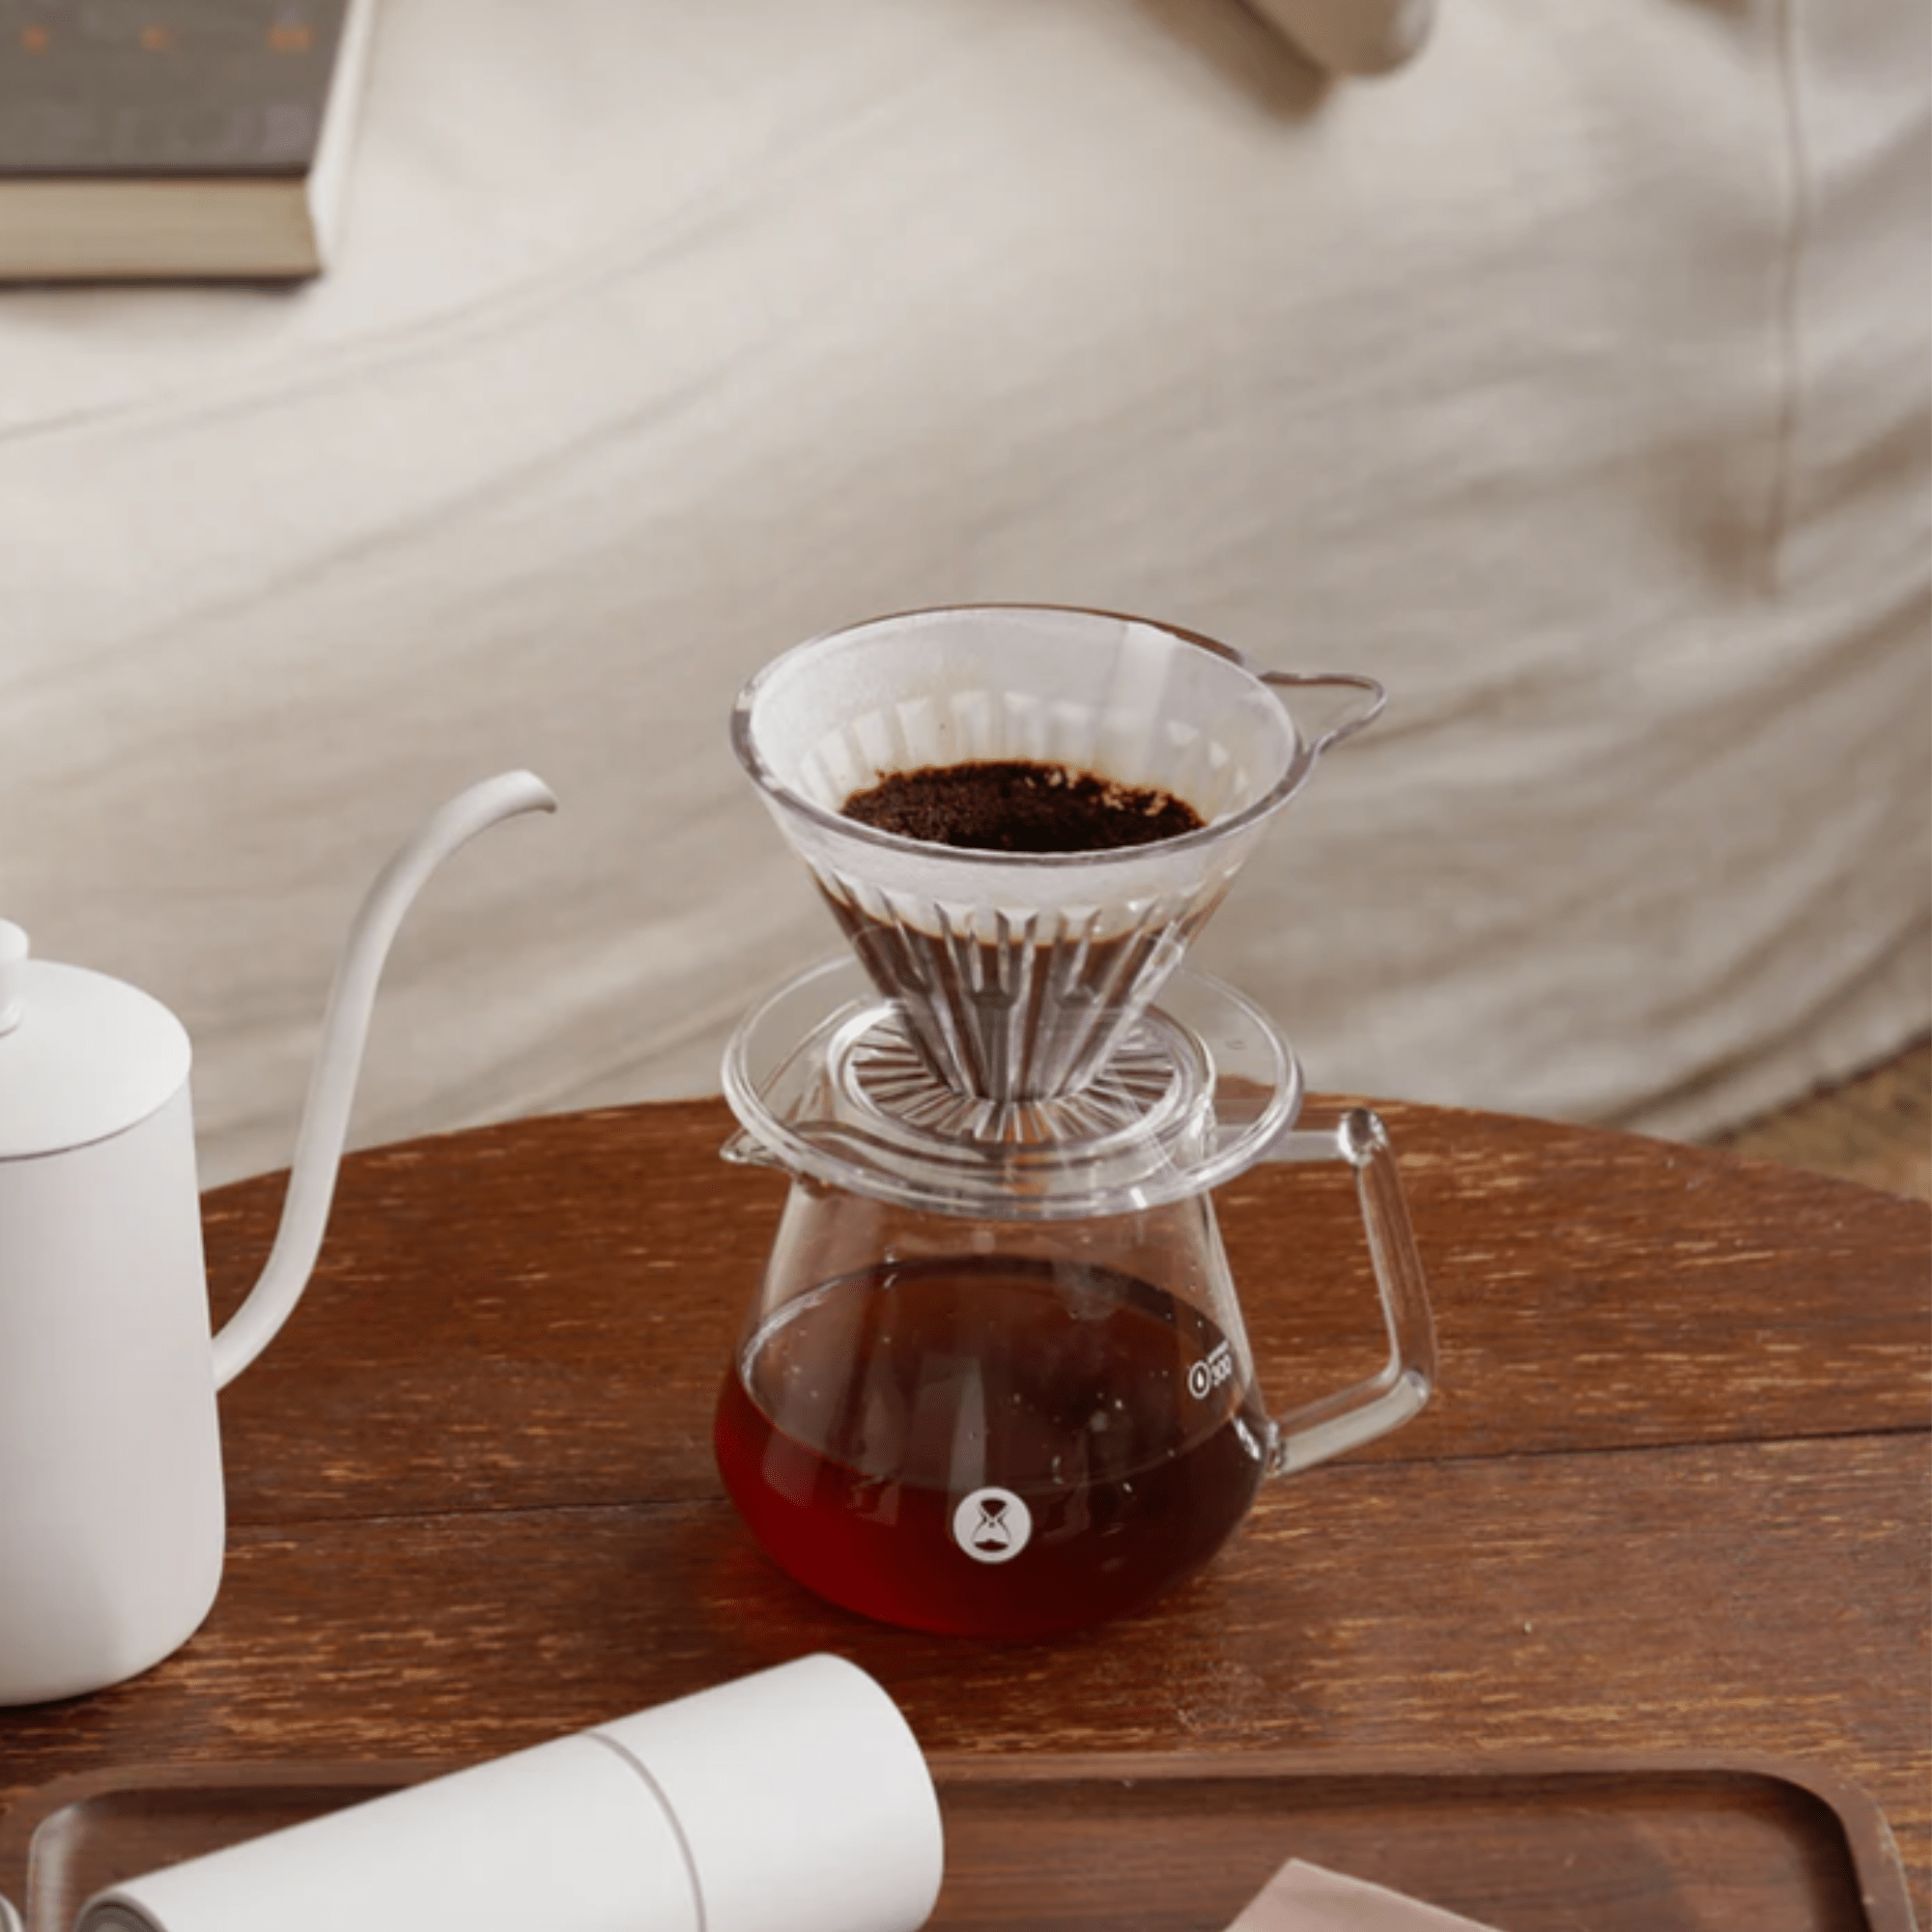 Timemore Pour Over Kit - Size 02 - Velo Coffee Roasters